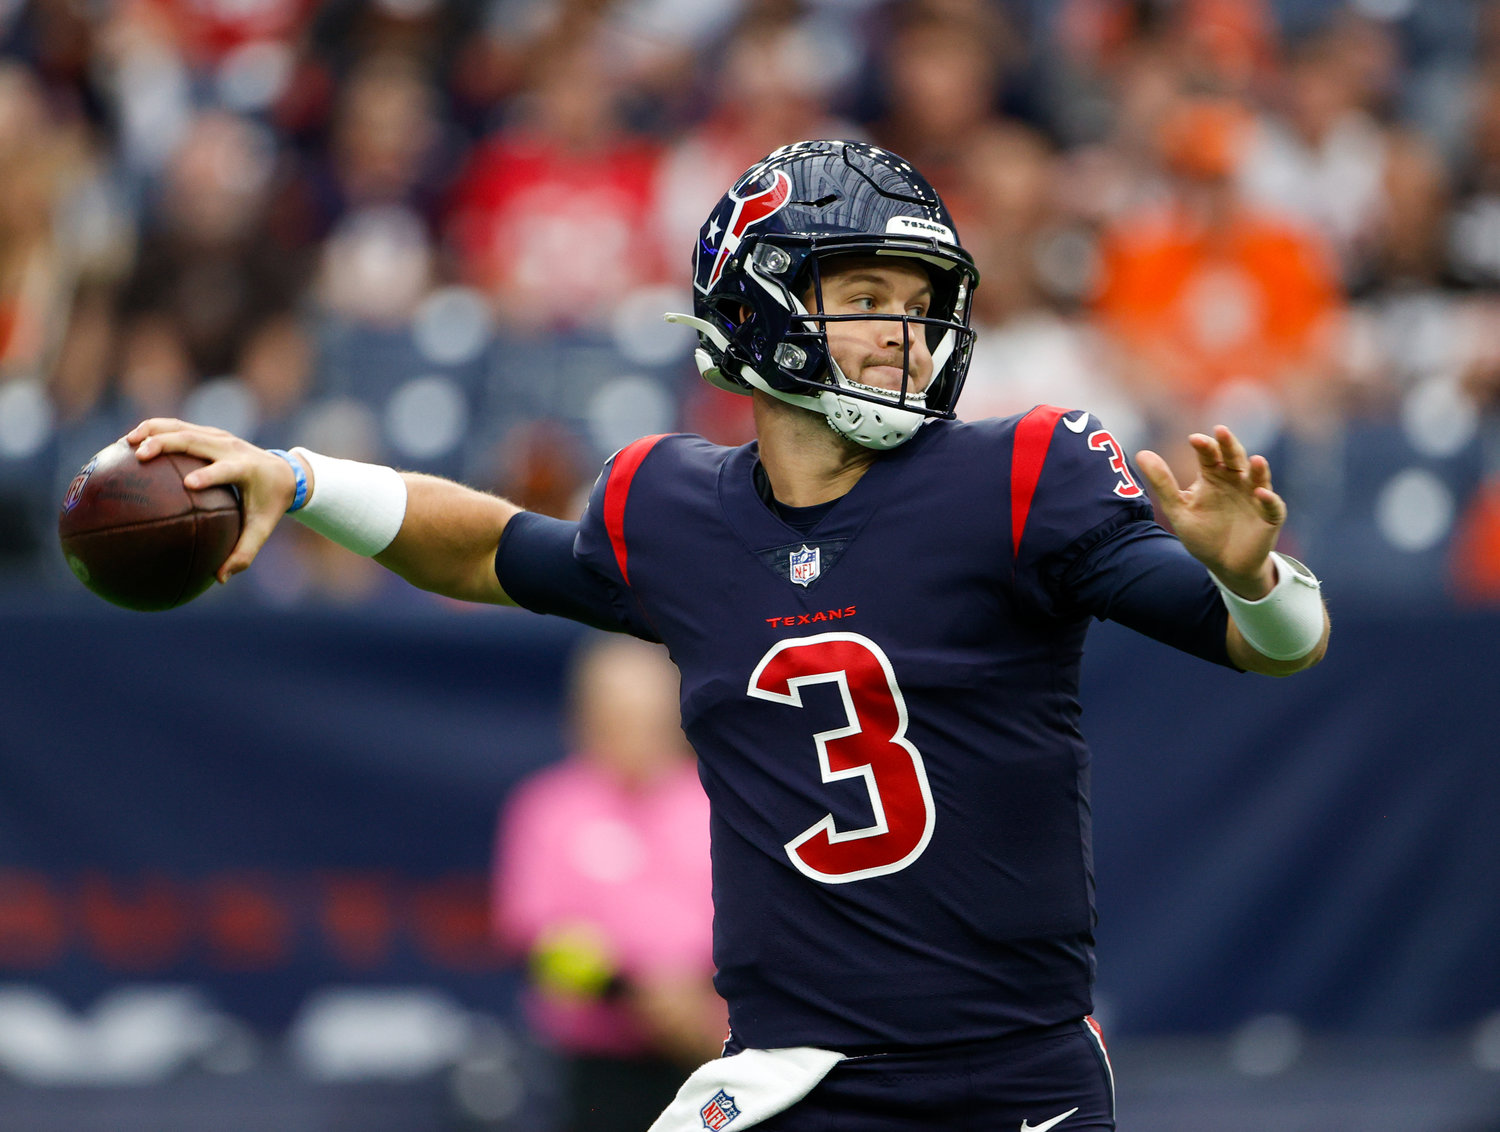 Houston Texans quarterback Kyle Allen (3) passes the ball during an NFL game between the Houston Texans and the Cleveland Browns on Dec. 4, 2022, in Houston. The Browns won, 27-14.